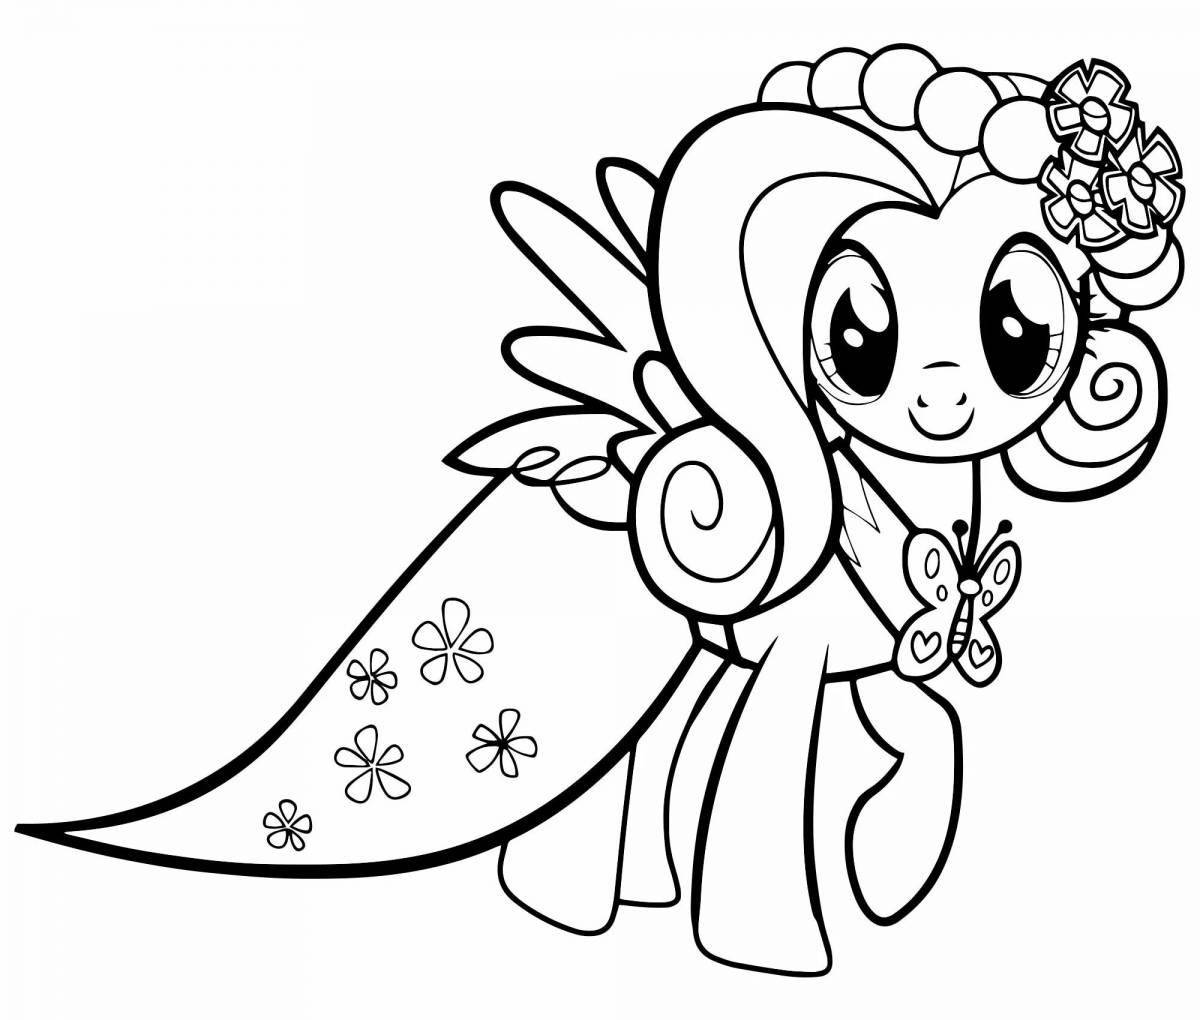 Coloring book with magic pony